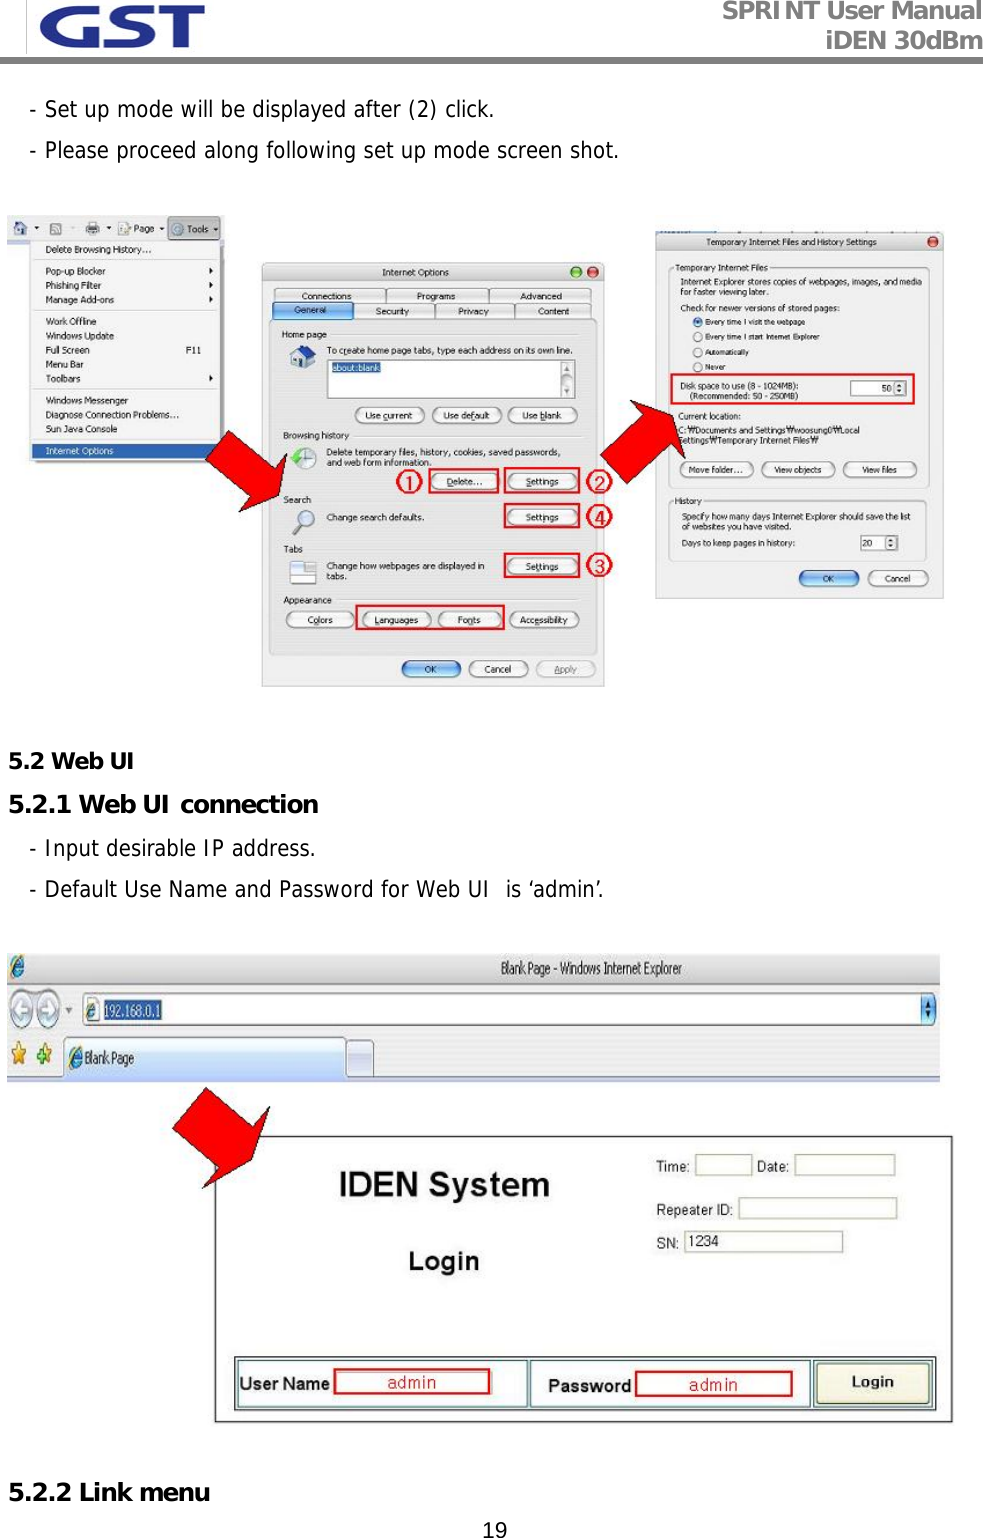 SPRINT User Manual iDEN 30dBm   19   - Set up mode will be displayed after (2) click.    - Please proceed along following set up mode screen shot.    5.2 Web UI  5.2.1 Web UI connection    - Input desirable IP address.    - Default Use Name and Password for Web UI  is ‘admin’.    5.2.2 Link menu 